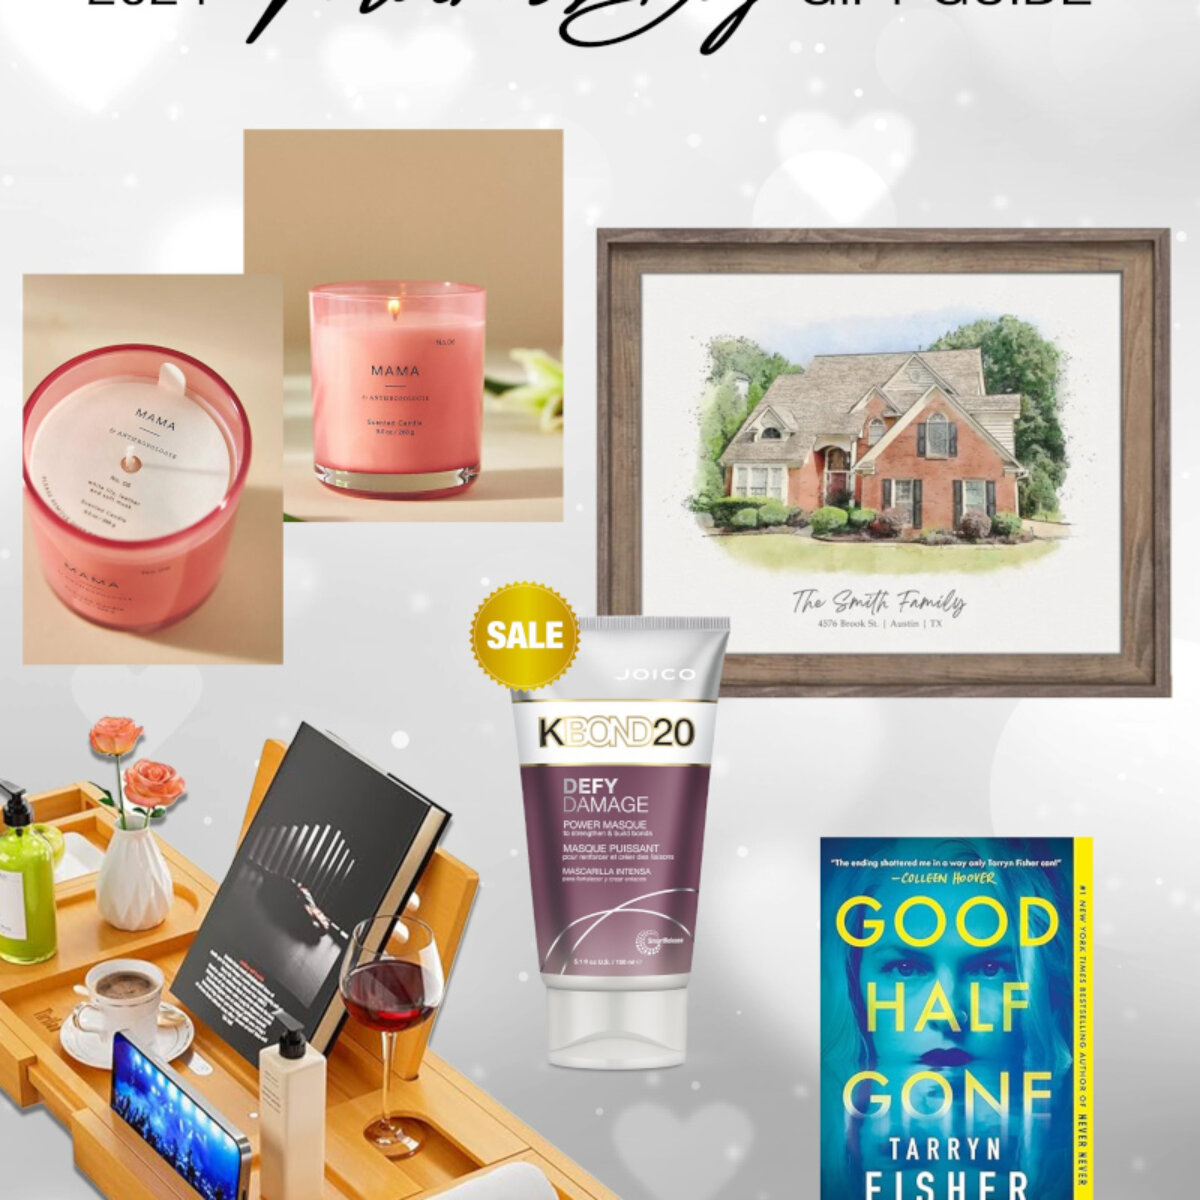 mothers day graphic with items: candle, portrait, tray, kbond20, and novel